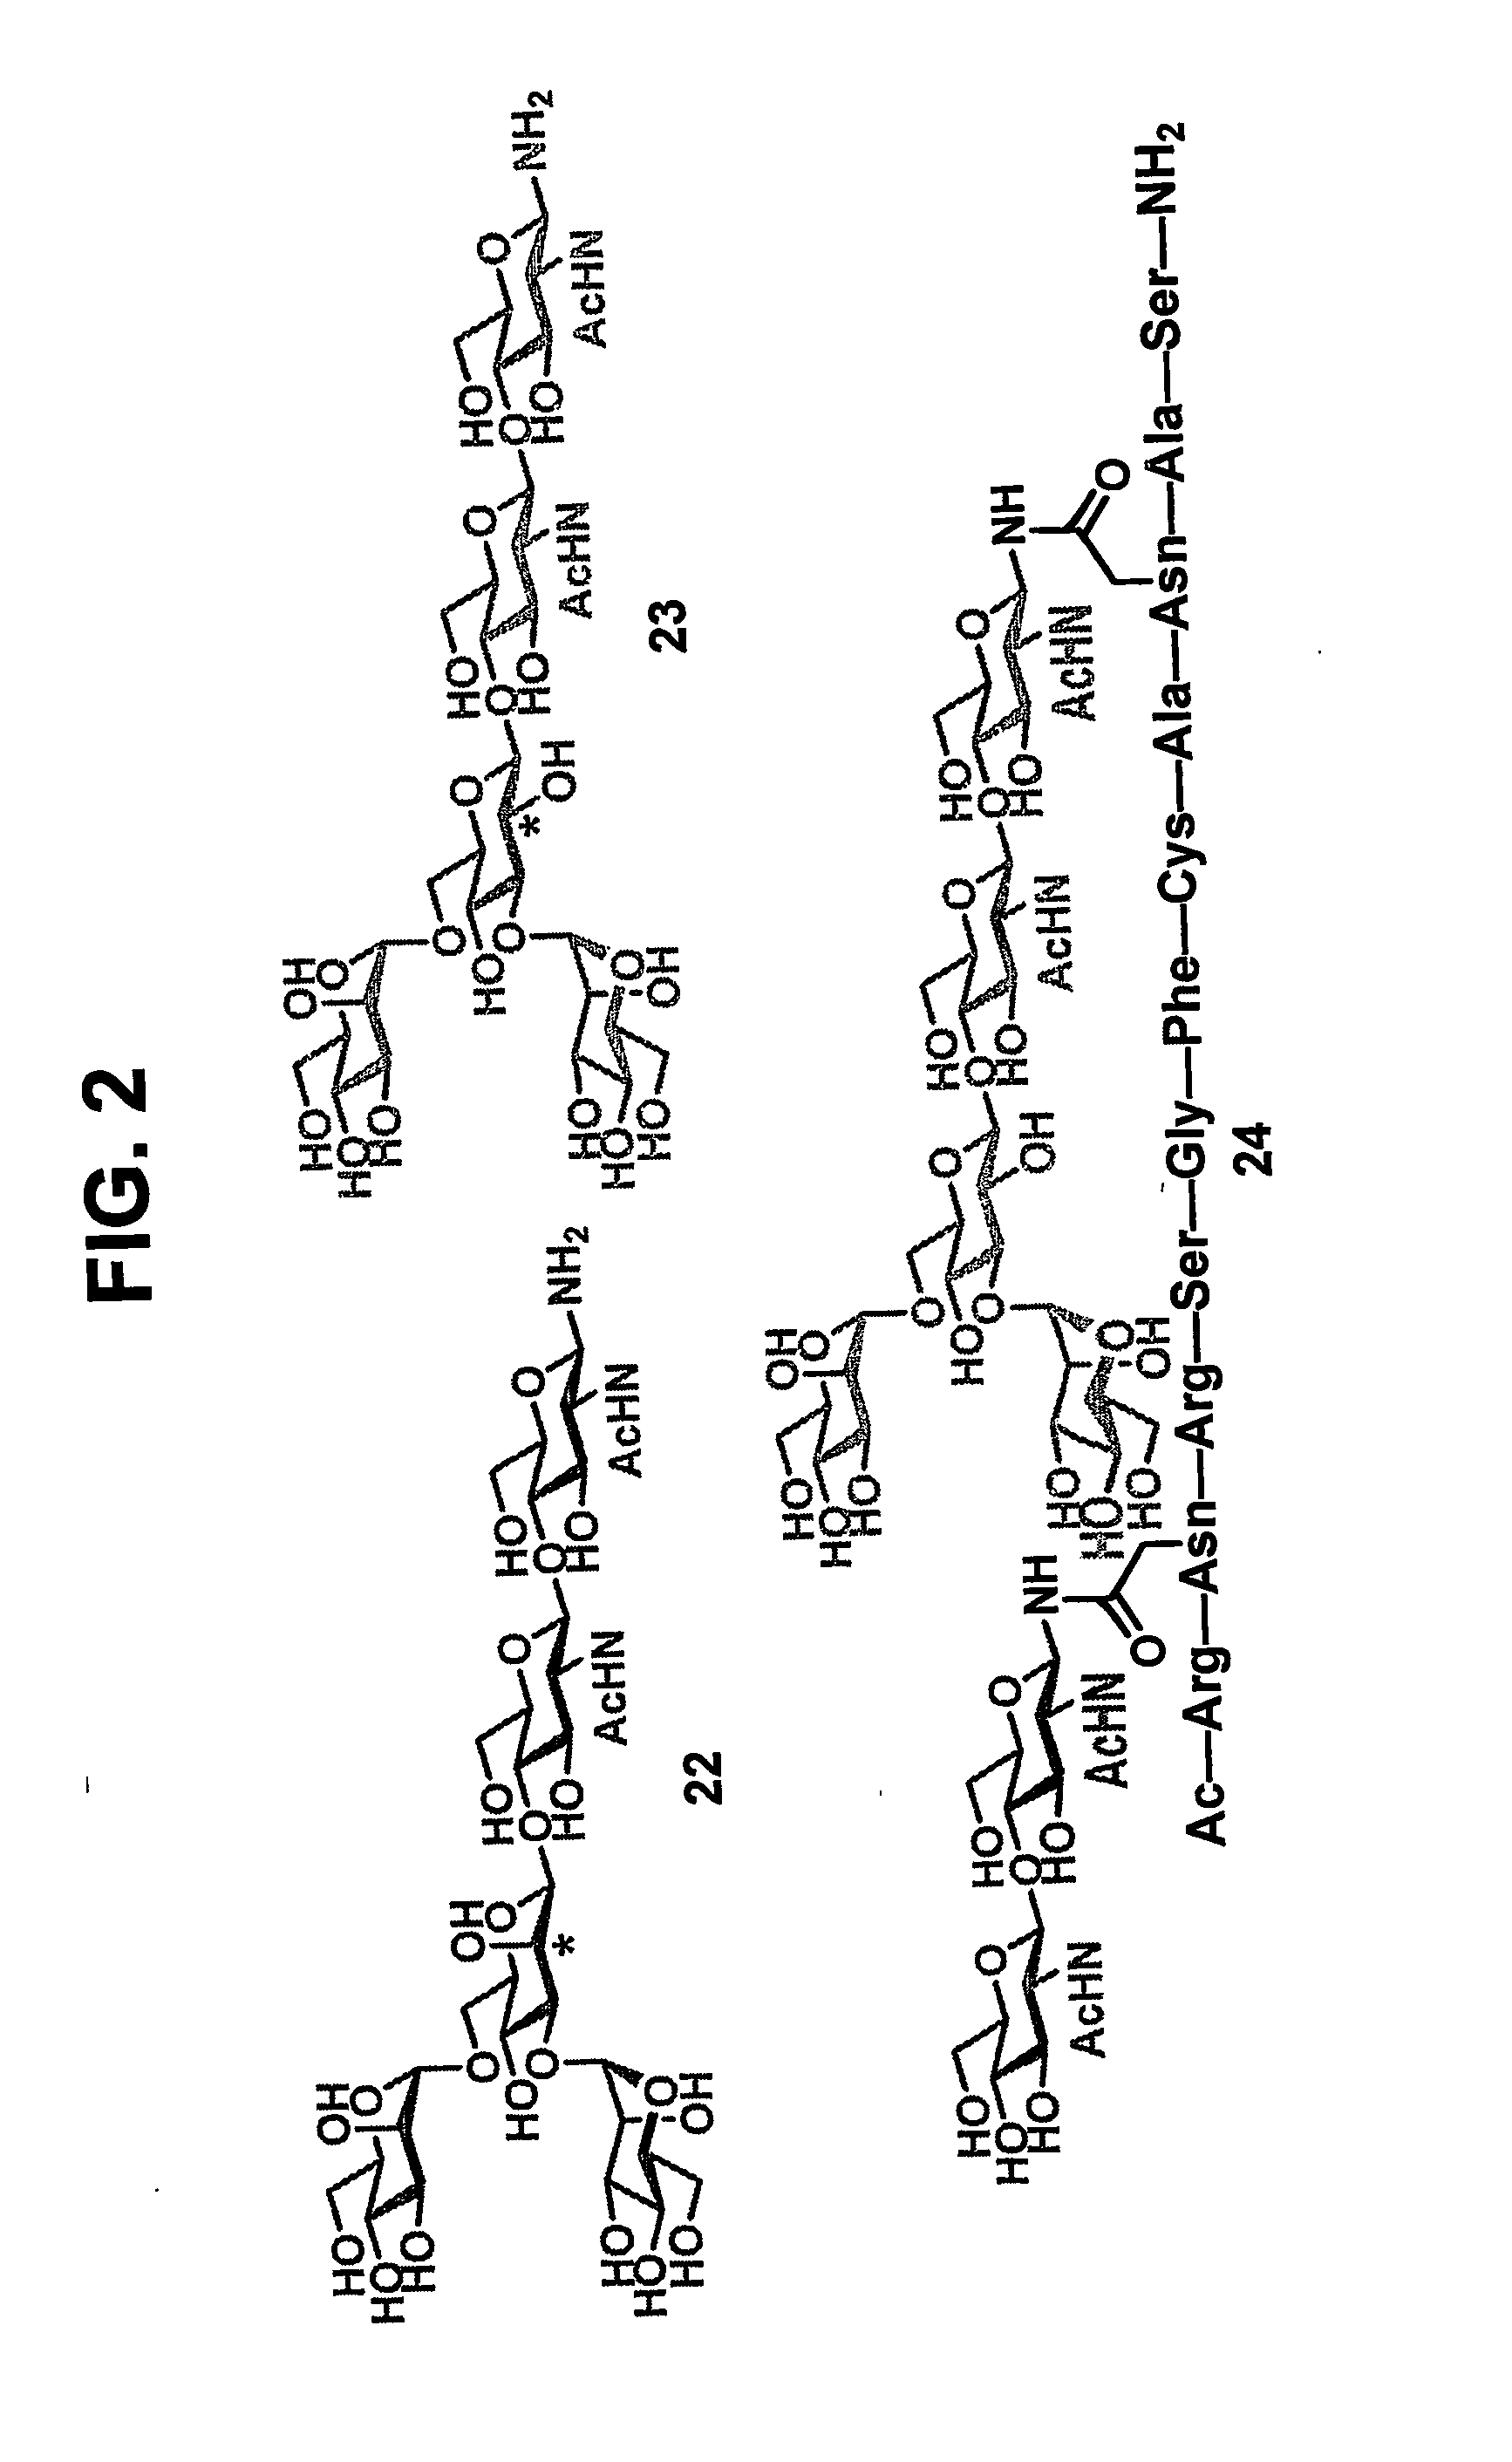 Method for preparing polyfunctionalized peptides and/or proteins via native chemical ligation